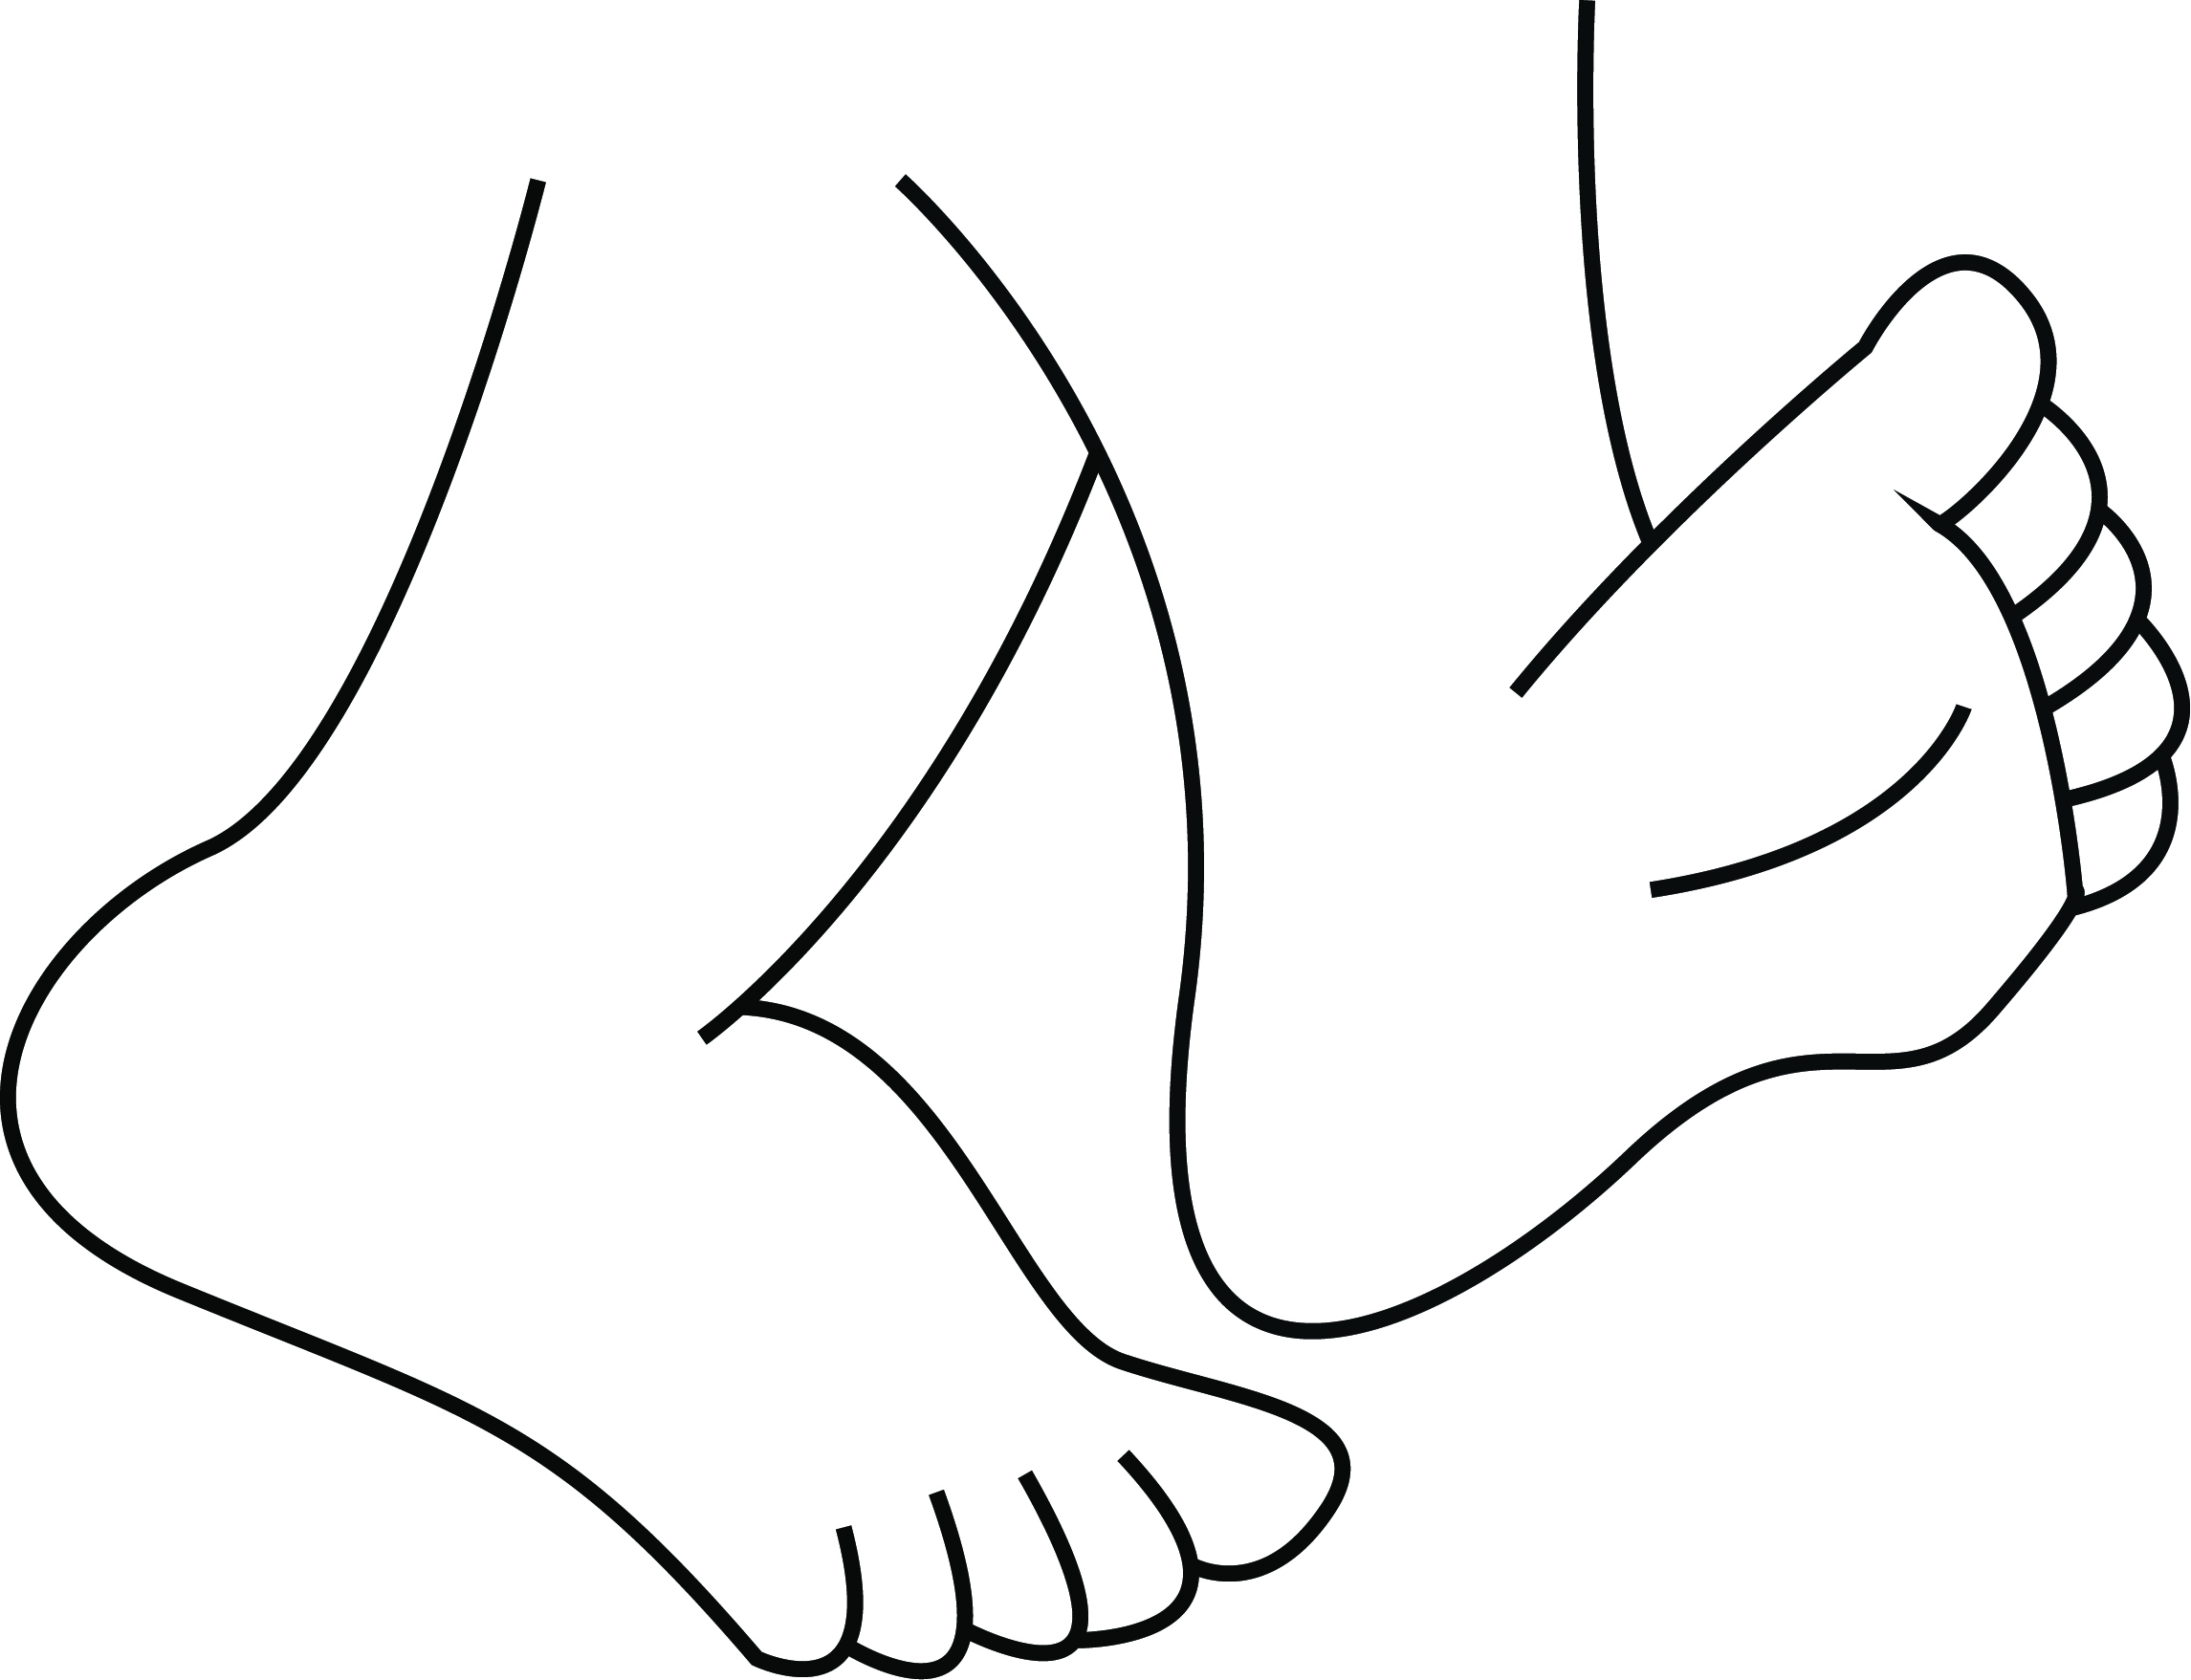 Download High Quality foot clipart black and white.